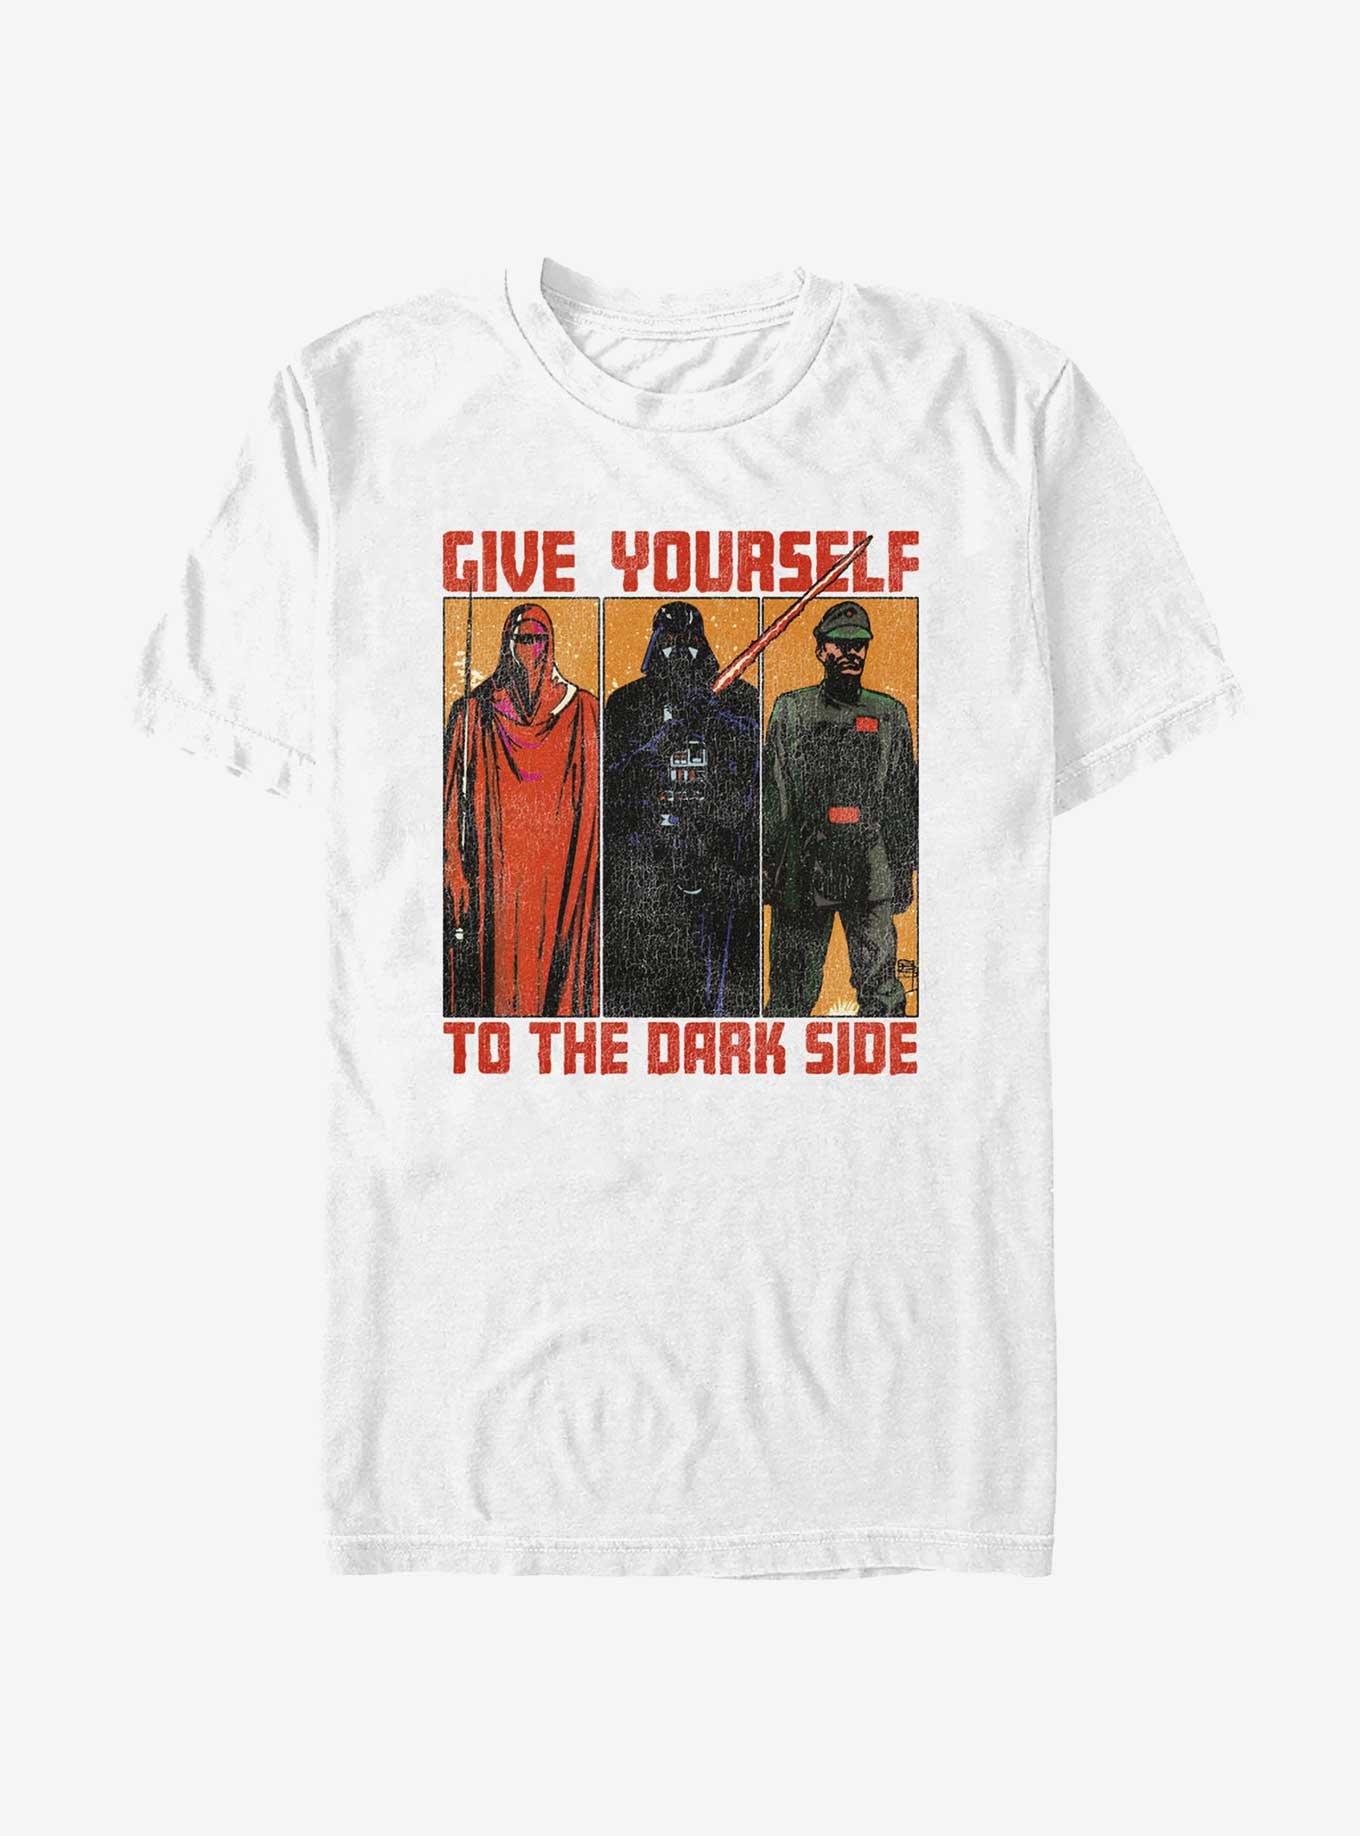 Star Wars Return Of The Jedi Give Yourself To The Dark Side T-Shirt, WHITE, hi-res